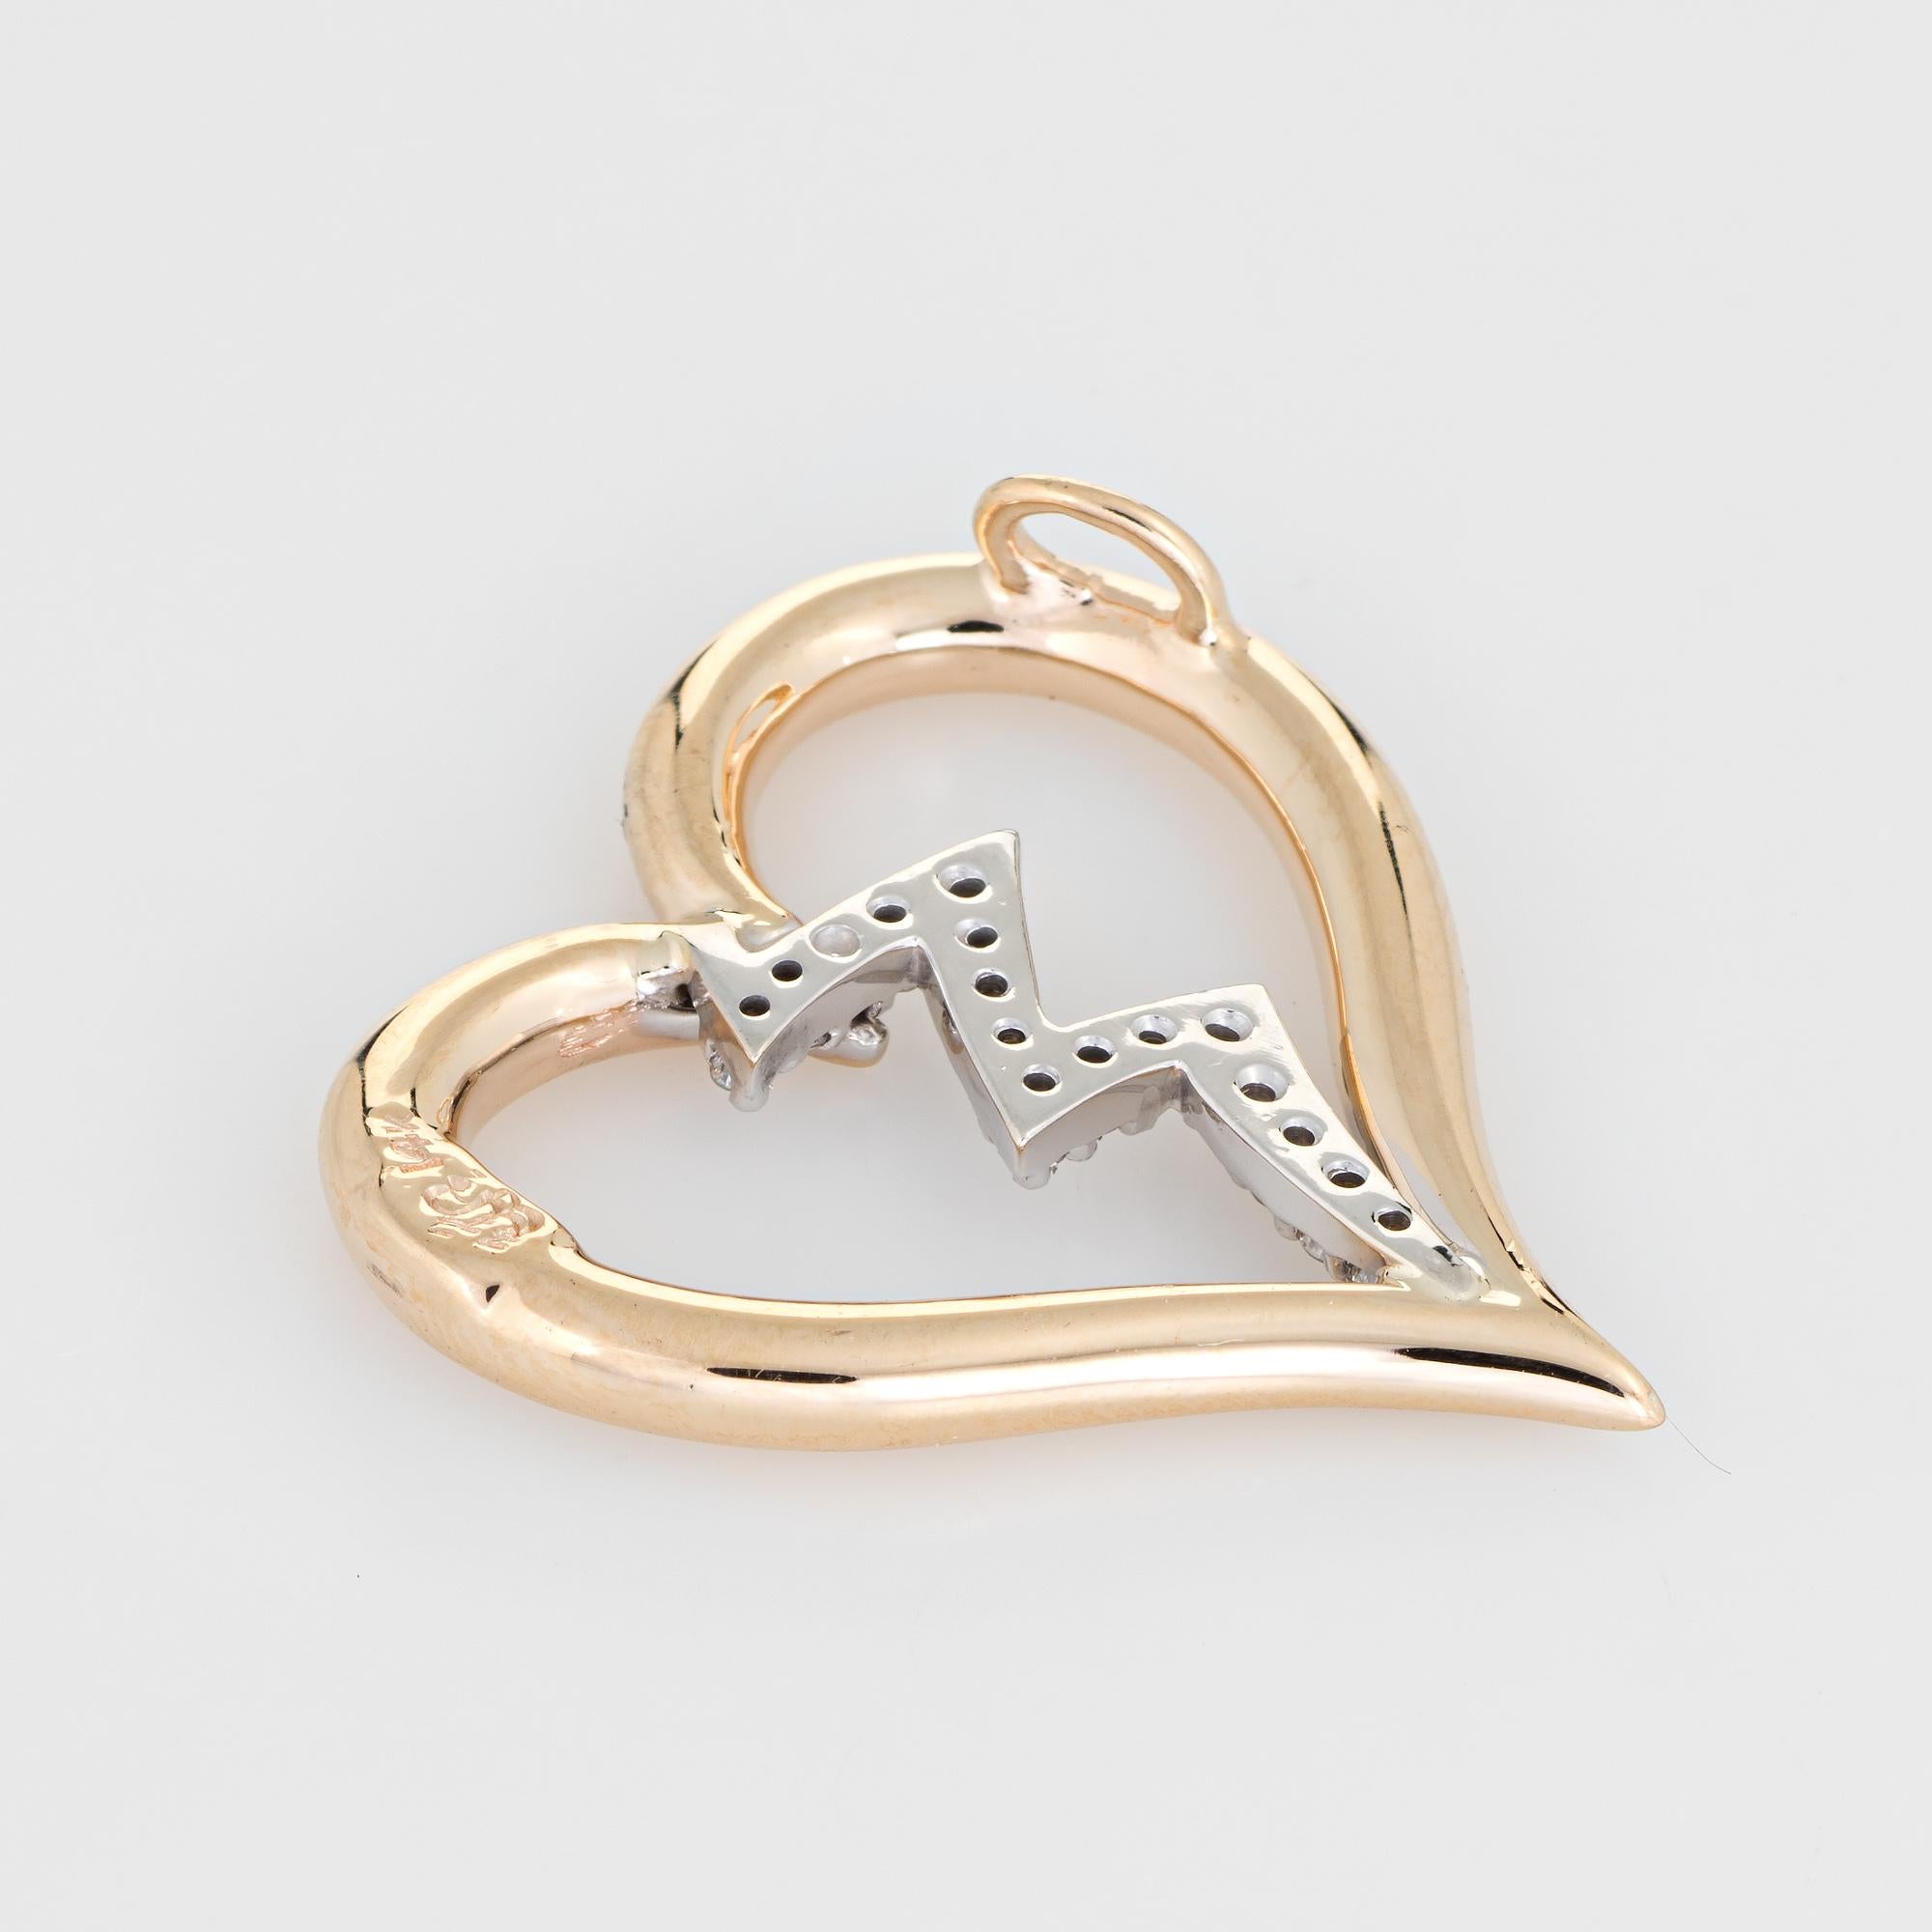 Stylish estate diamond heartbeat pendant crafted in 14 karat yellow gold. 

15 diamonds total an estimated 0.07 carats (estimated at H-I color and VS2-SI1 clarity). 

The distinct pendant features a diamond set heartbeat down the center of the